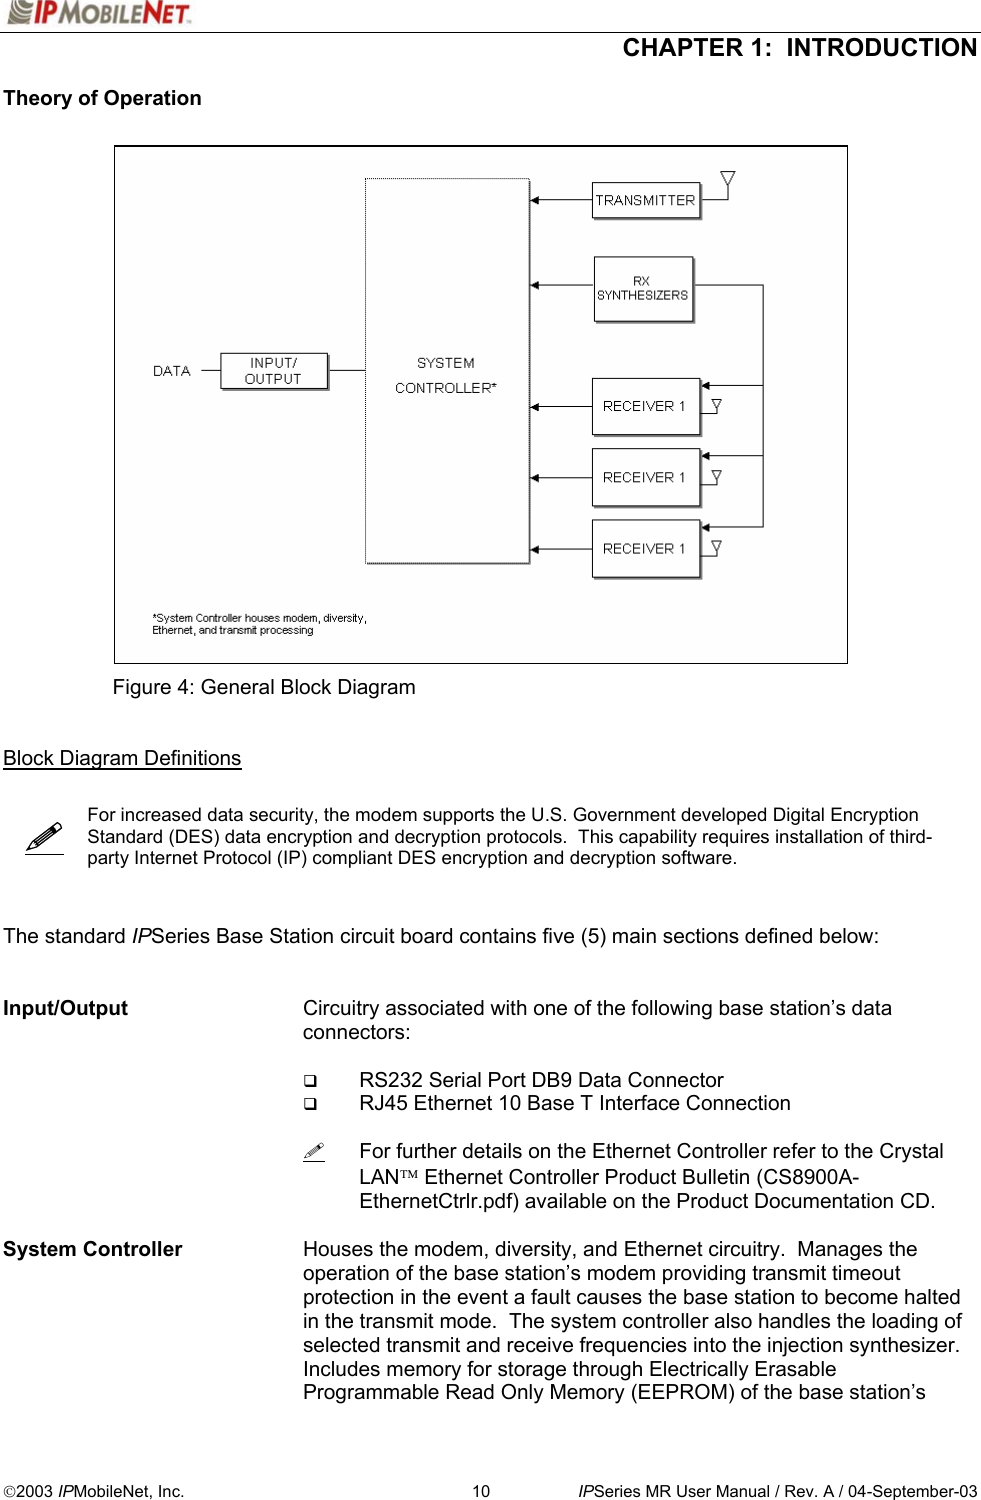  CHAPTER 1:  INTRODUCTION  2003 IPMobileNet, Inc.  10  IPSeries MR User Manual / Rev. A / 04-September-03   Theory of Operation                                 Figure 4: General Block Diagram   Block Diagram Definitions     For increased data security, the modem supports the U.S. Government developed Digital Encryption Standard (DES) data encryption and decryption protocols.  This capability requires installation of third-party Internet Protocol (IP) compliant DES encryption and decryption software.    The standard IPSeries Base Station circuit board contains five (5) main sections defined below:   Input/Output    Circuitry associated with one of the following base station’s data connectors:   RS232 Serial Port DB9 Data Connector  RJ45 Ethernet 10 Base T Interface Connection     For further details on the Ethernet Controller refer to the Crystal LAN Ethernet Controller Product Bulletin (CS8900A-EthernetCtrlr.pdf) available on the Product Documentation CD.  System Controller    Houses the modem, diversity, and Ethernet circuitry.  Manages the operation of the base station’s modem providing transmit timeout protection in the event a fault causes the base station to become halted in the transmit mode.  The system controller also handles the loading of selected transmit and receive frequencies into the injection synthesizer.  Includes memory for storage through Electrically Erasable Programmable Read Only Memory (EEPROM) of the base station’s 